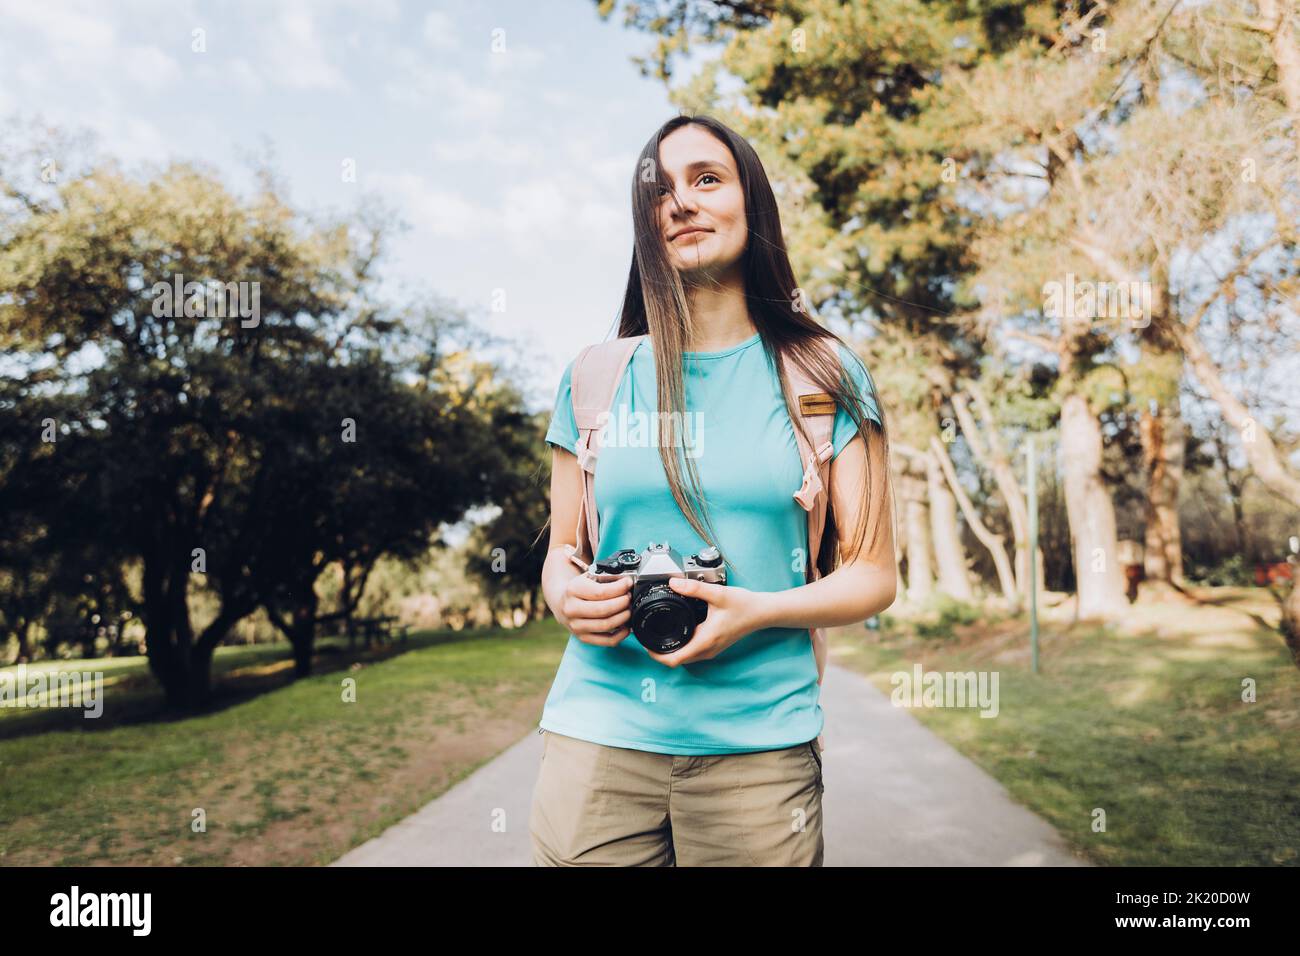 Young tourist woman traveler, wearing turquoise t shirt and a backpack, taking photos while walking in the park. Stock Photo